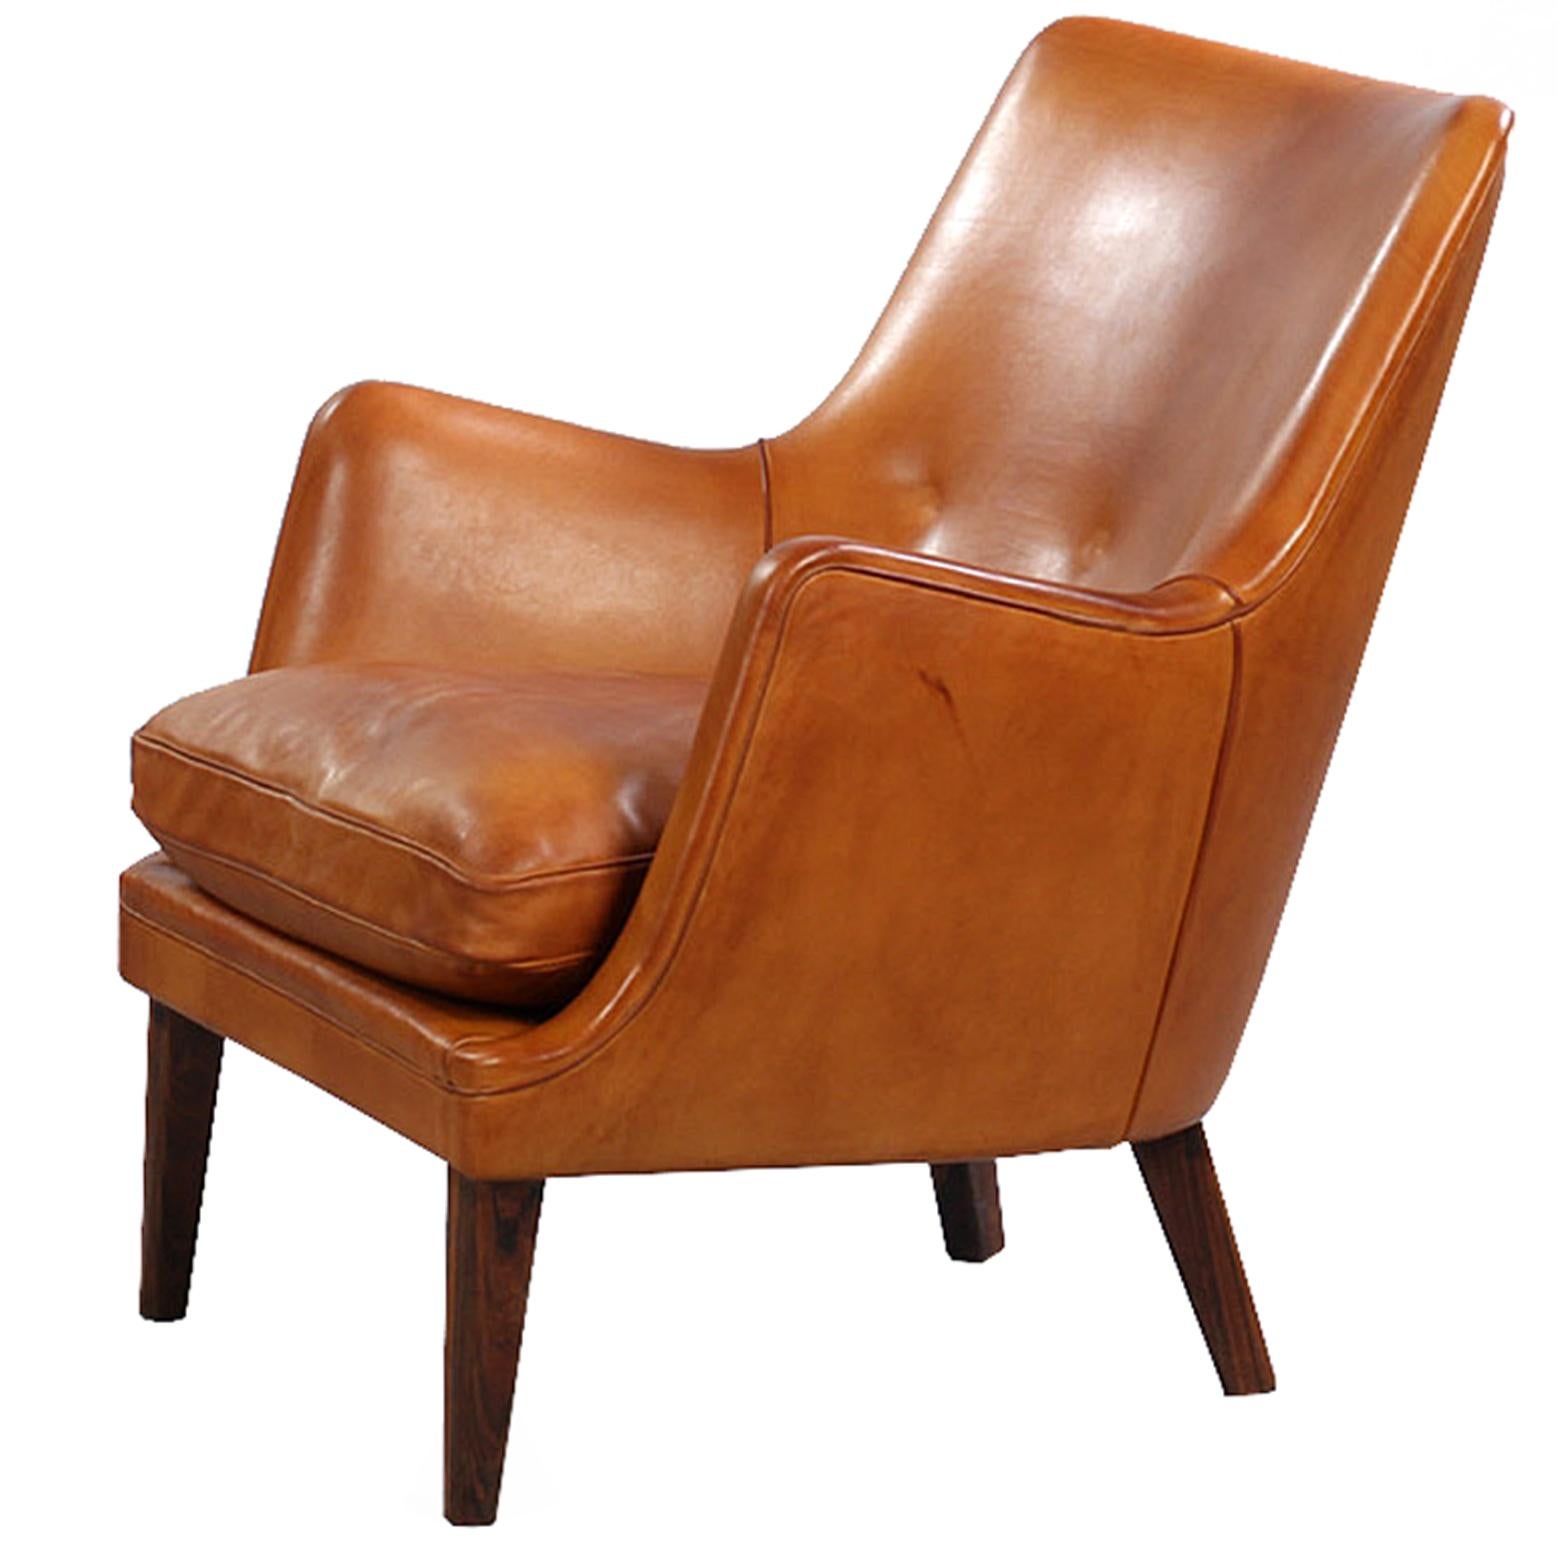 A nicely proportioned lounge chairs by Arne Vodder, manufactured by Ivan Schlechter in the early 1950s. Rosewood legs.